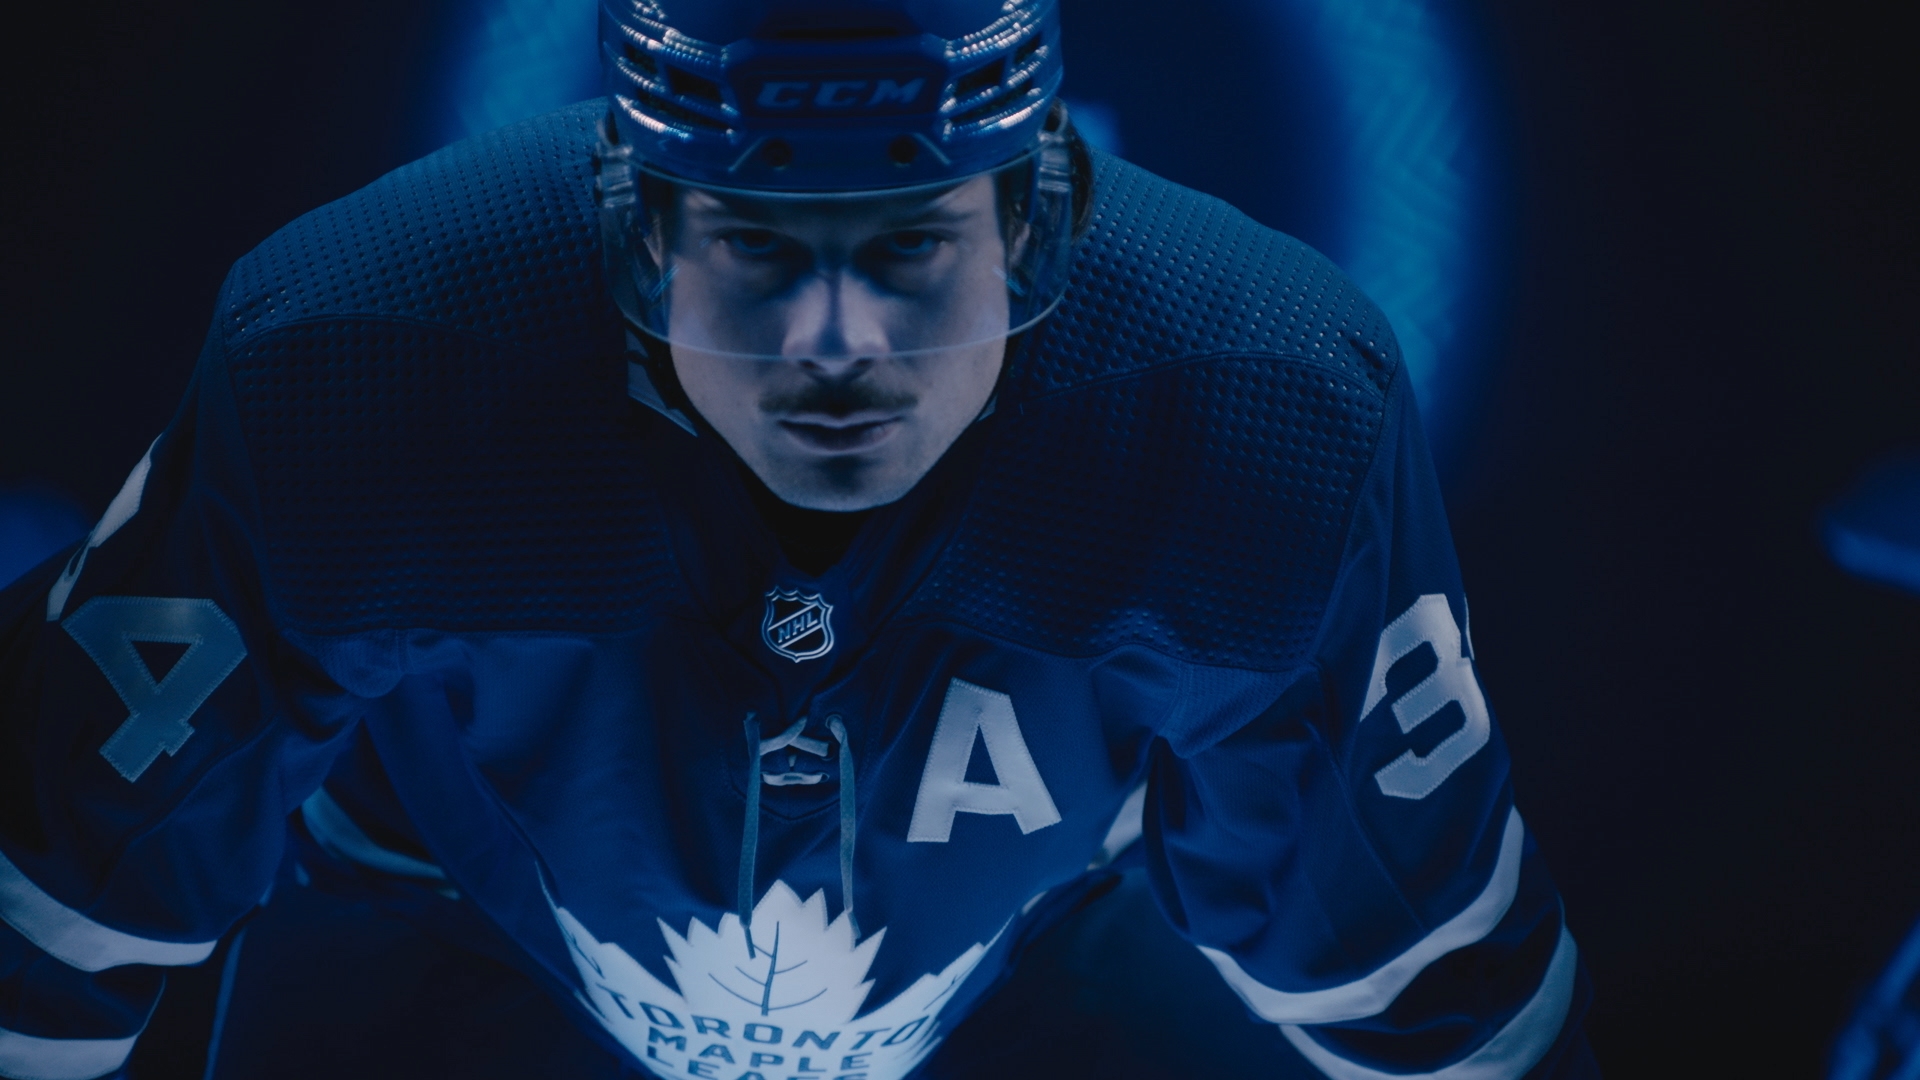 Auston Matthews Of The Toronto Maple Leafs Is NHL 22's Cover Star